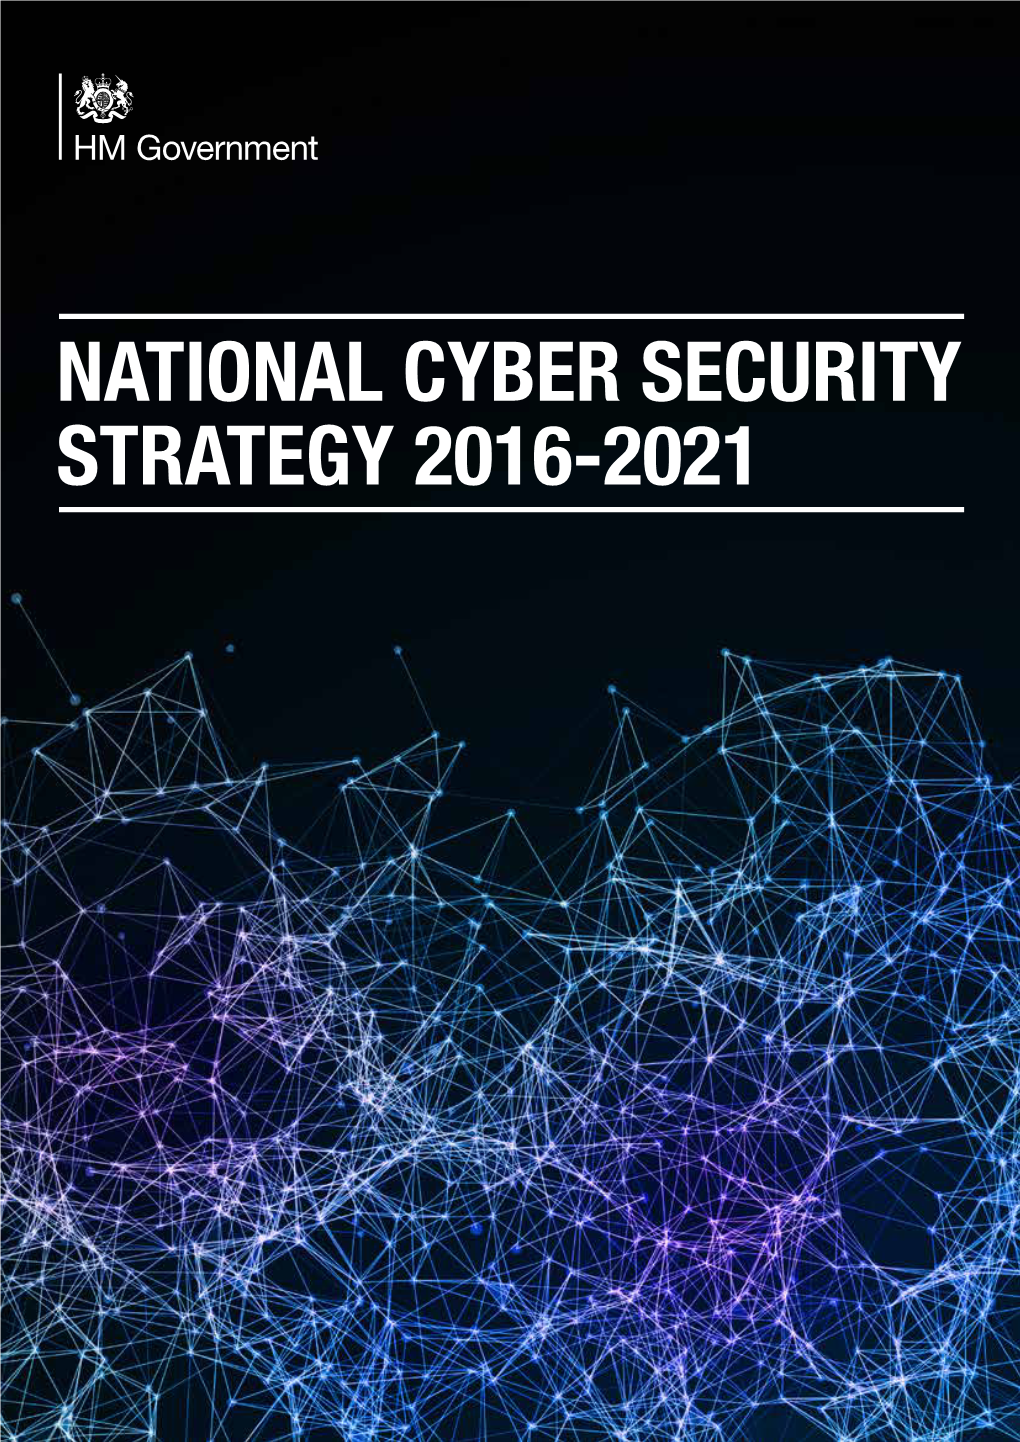 NATIONAL CYBER SECURITY STRATEGY 2016-2021 Contents